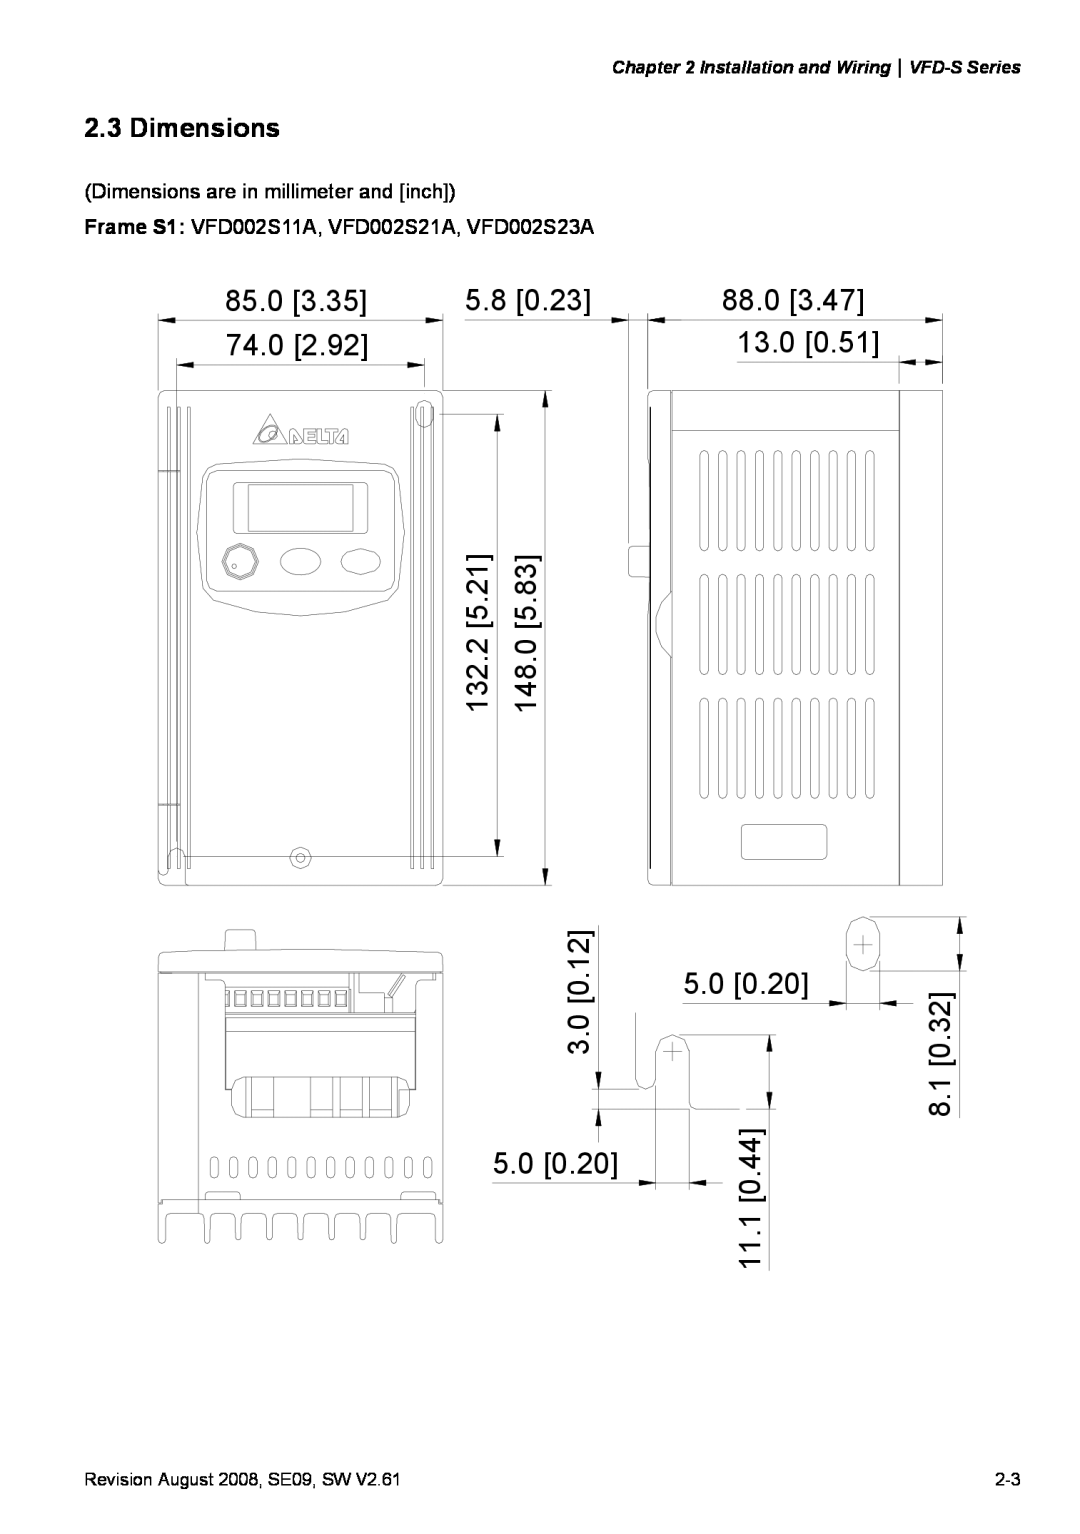 Delta Electronics VFD-S manual Dimensions are in millimeter and inch, Frame S1 VFD002S11A, VFD002S21A, VFD002S23A 